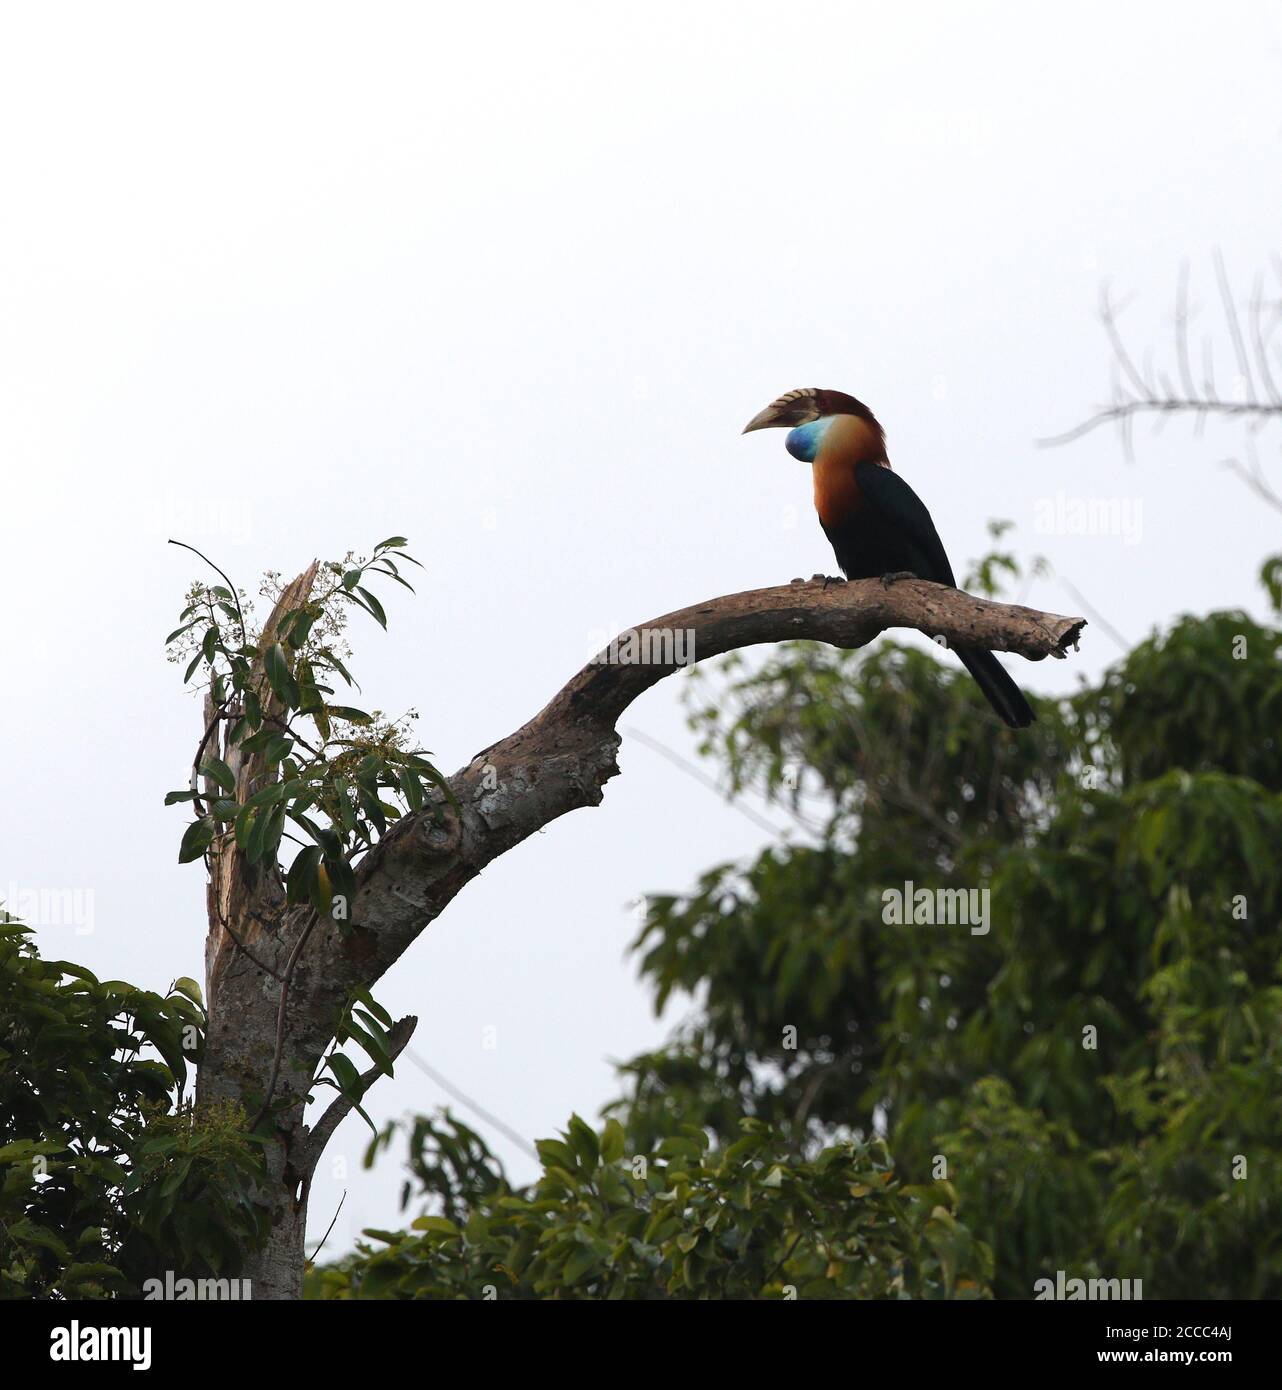 Sumba Hornbill (Rhyticeros everetti) on the island Sumba in the Lesser Sundas, Indonesia. Perched on a branch in a tall tree. Stock Photo